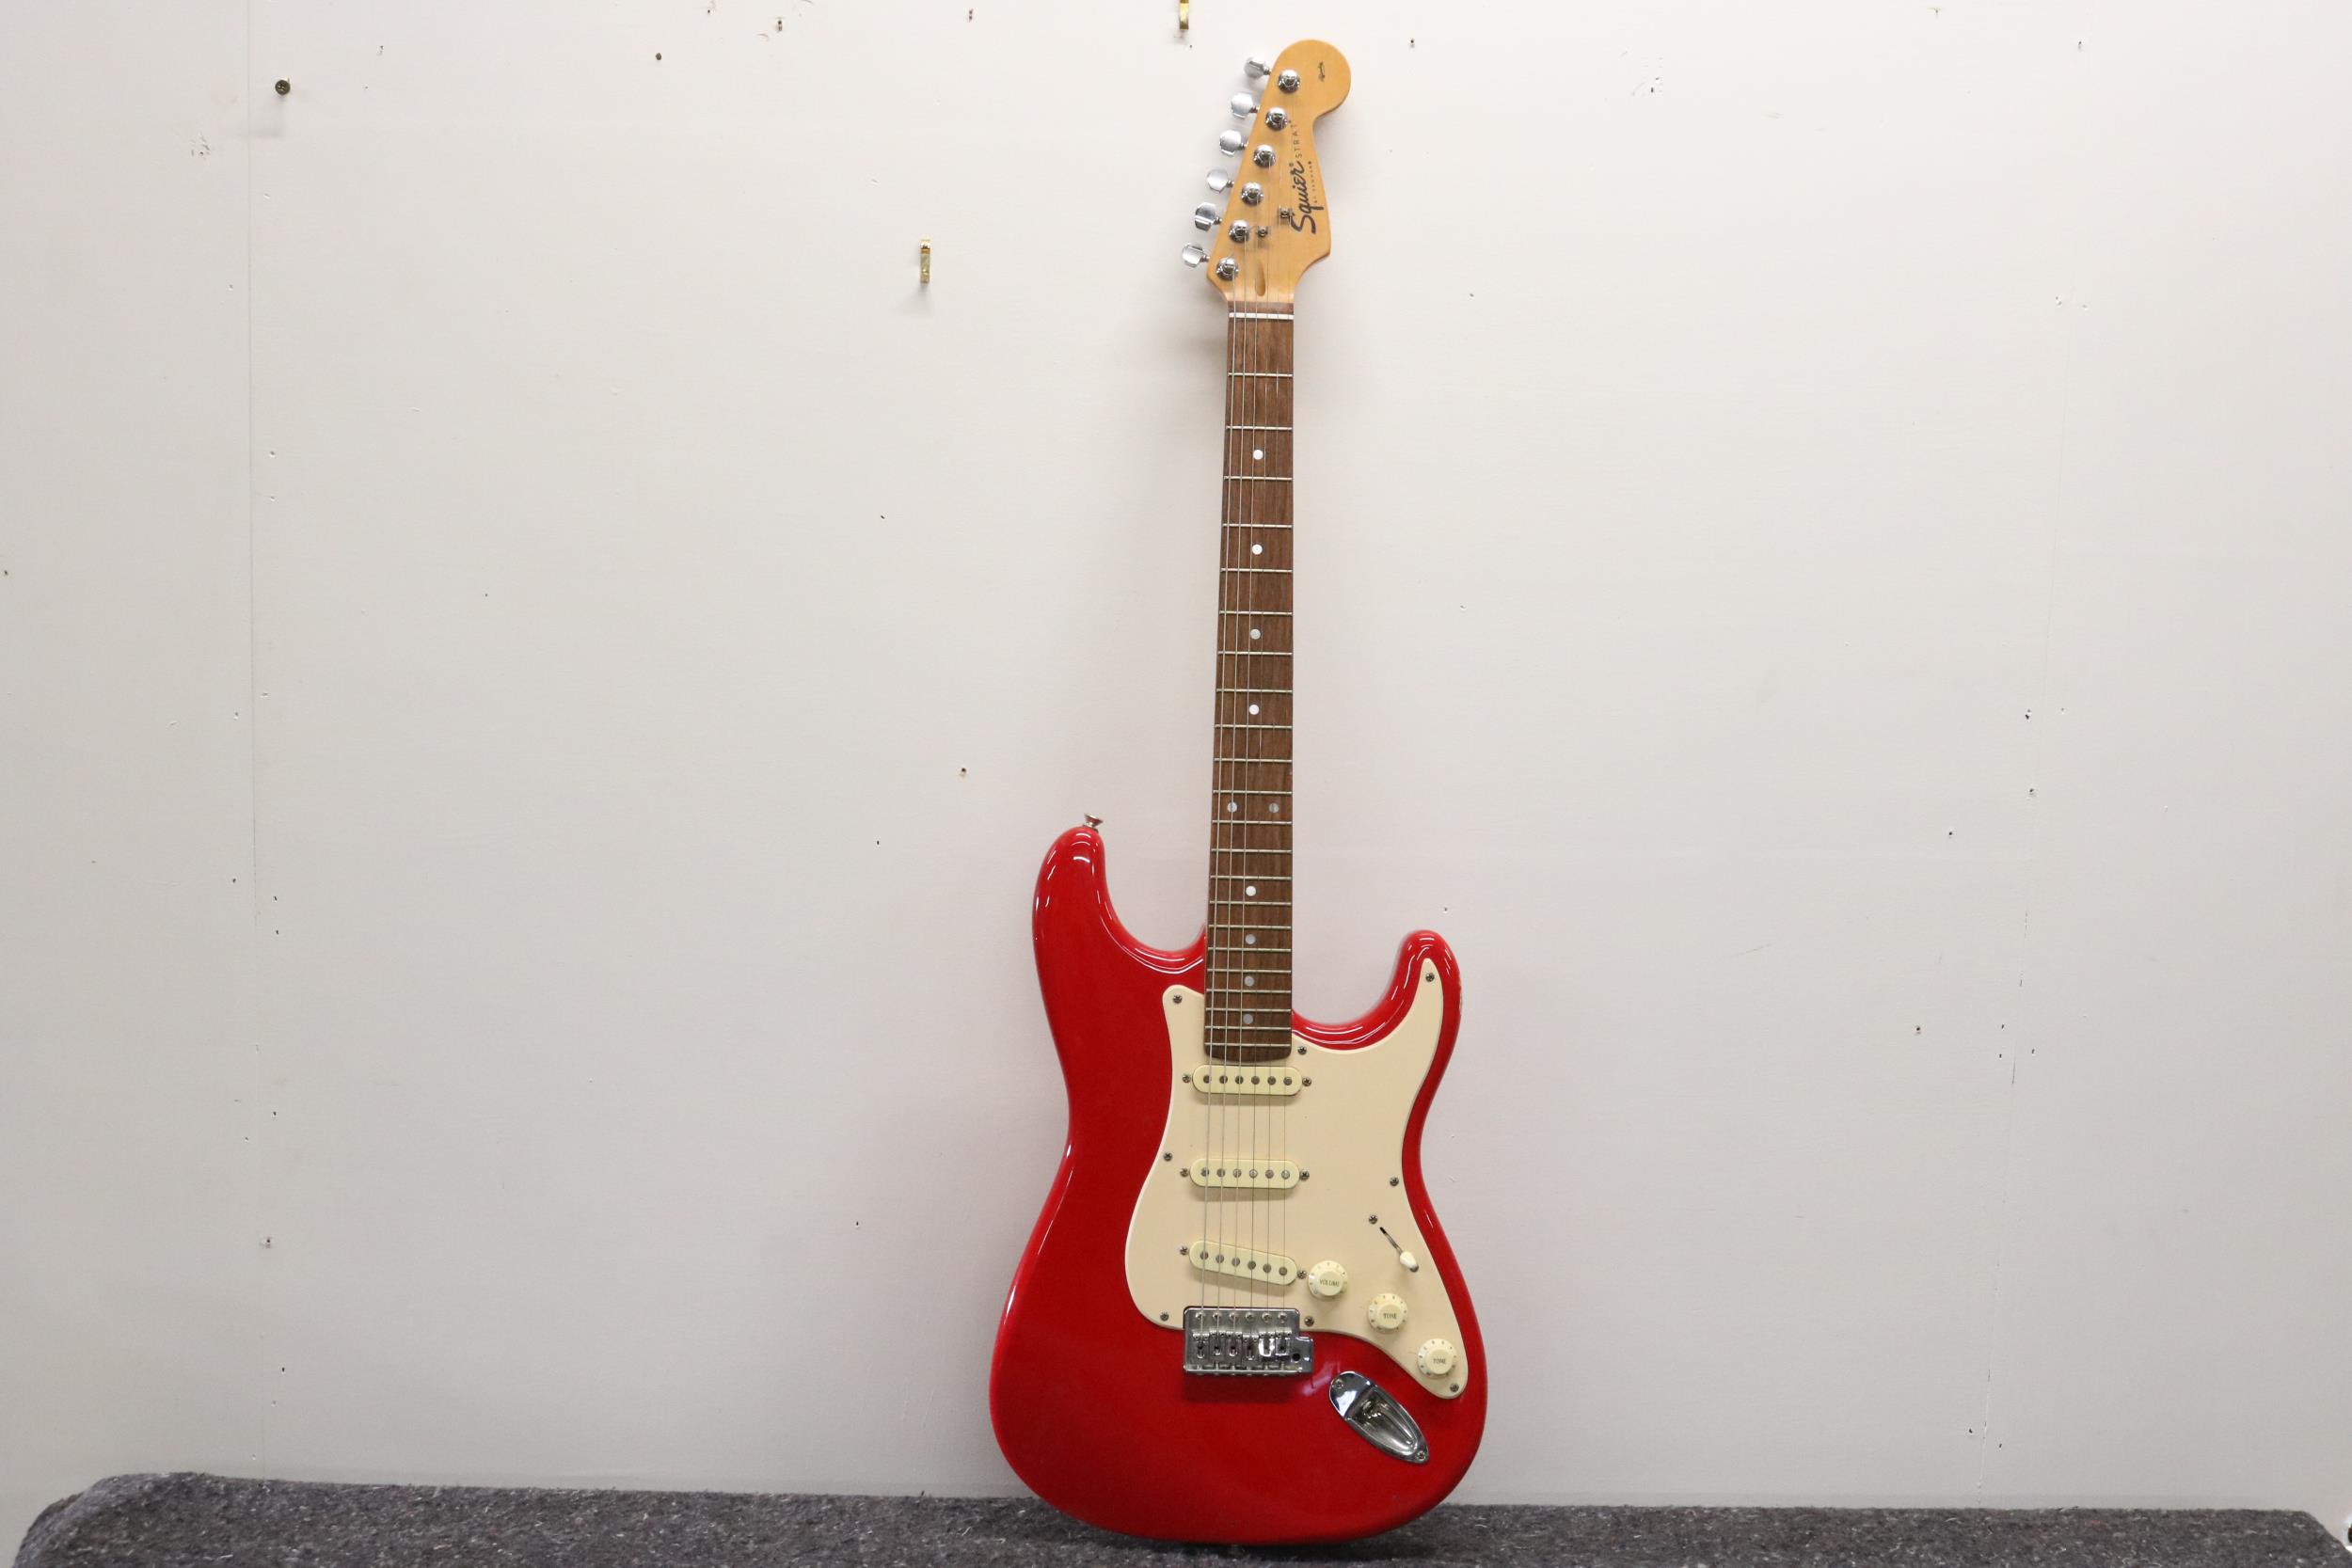 Squire Strat by Fender Red Electric Guitar - Untested.